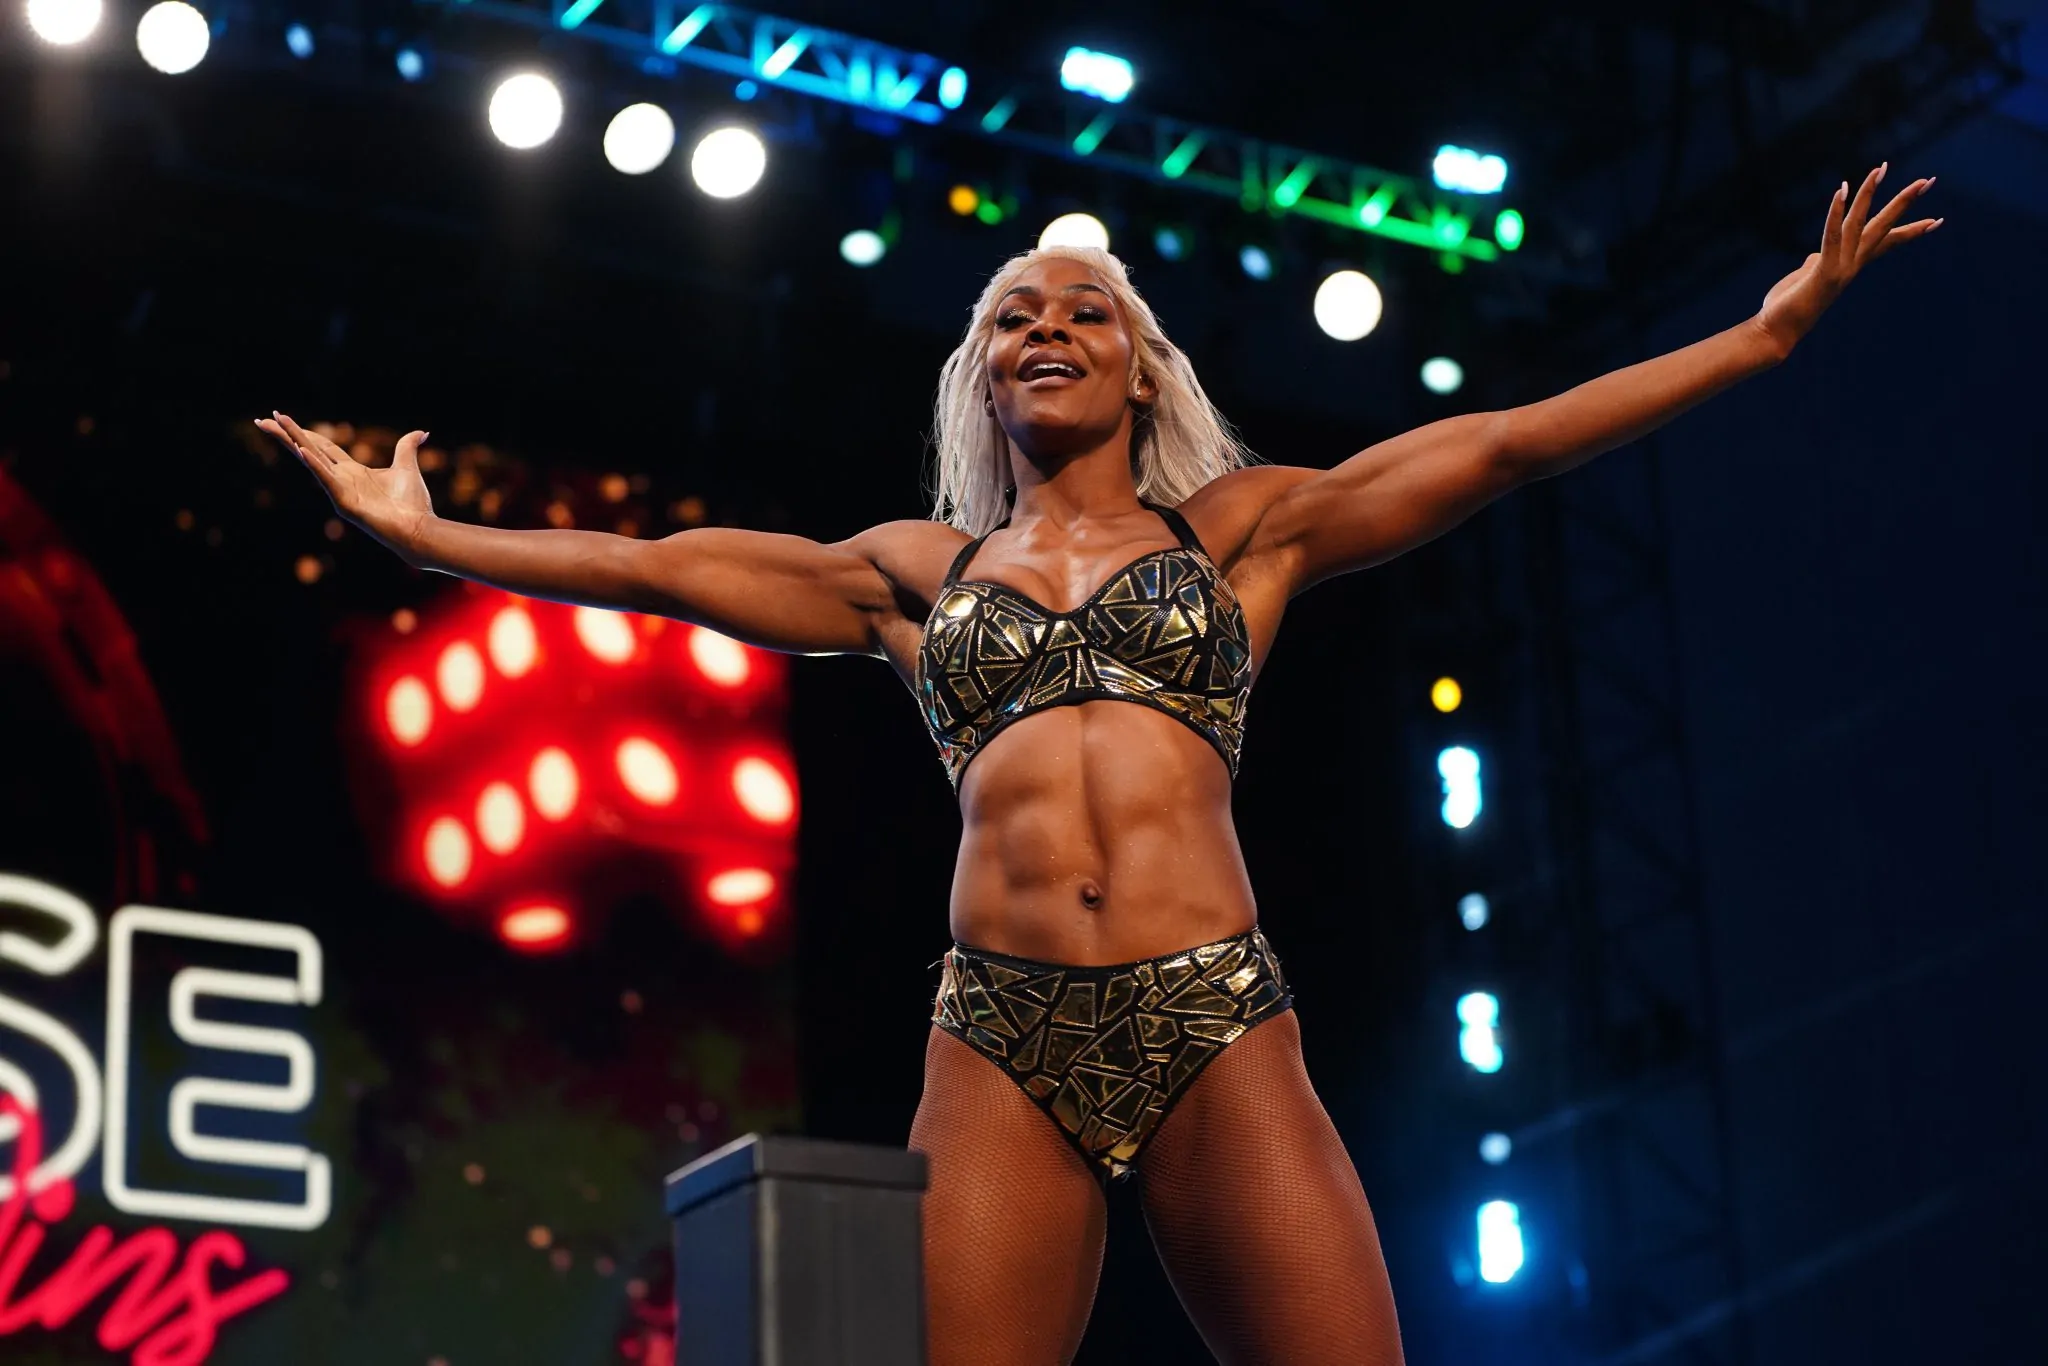 Jade Cargill Emerges as a Prominent Main Event Attraction for WWE, According to Booker T